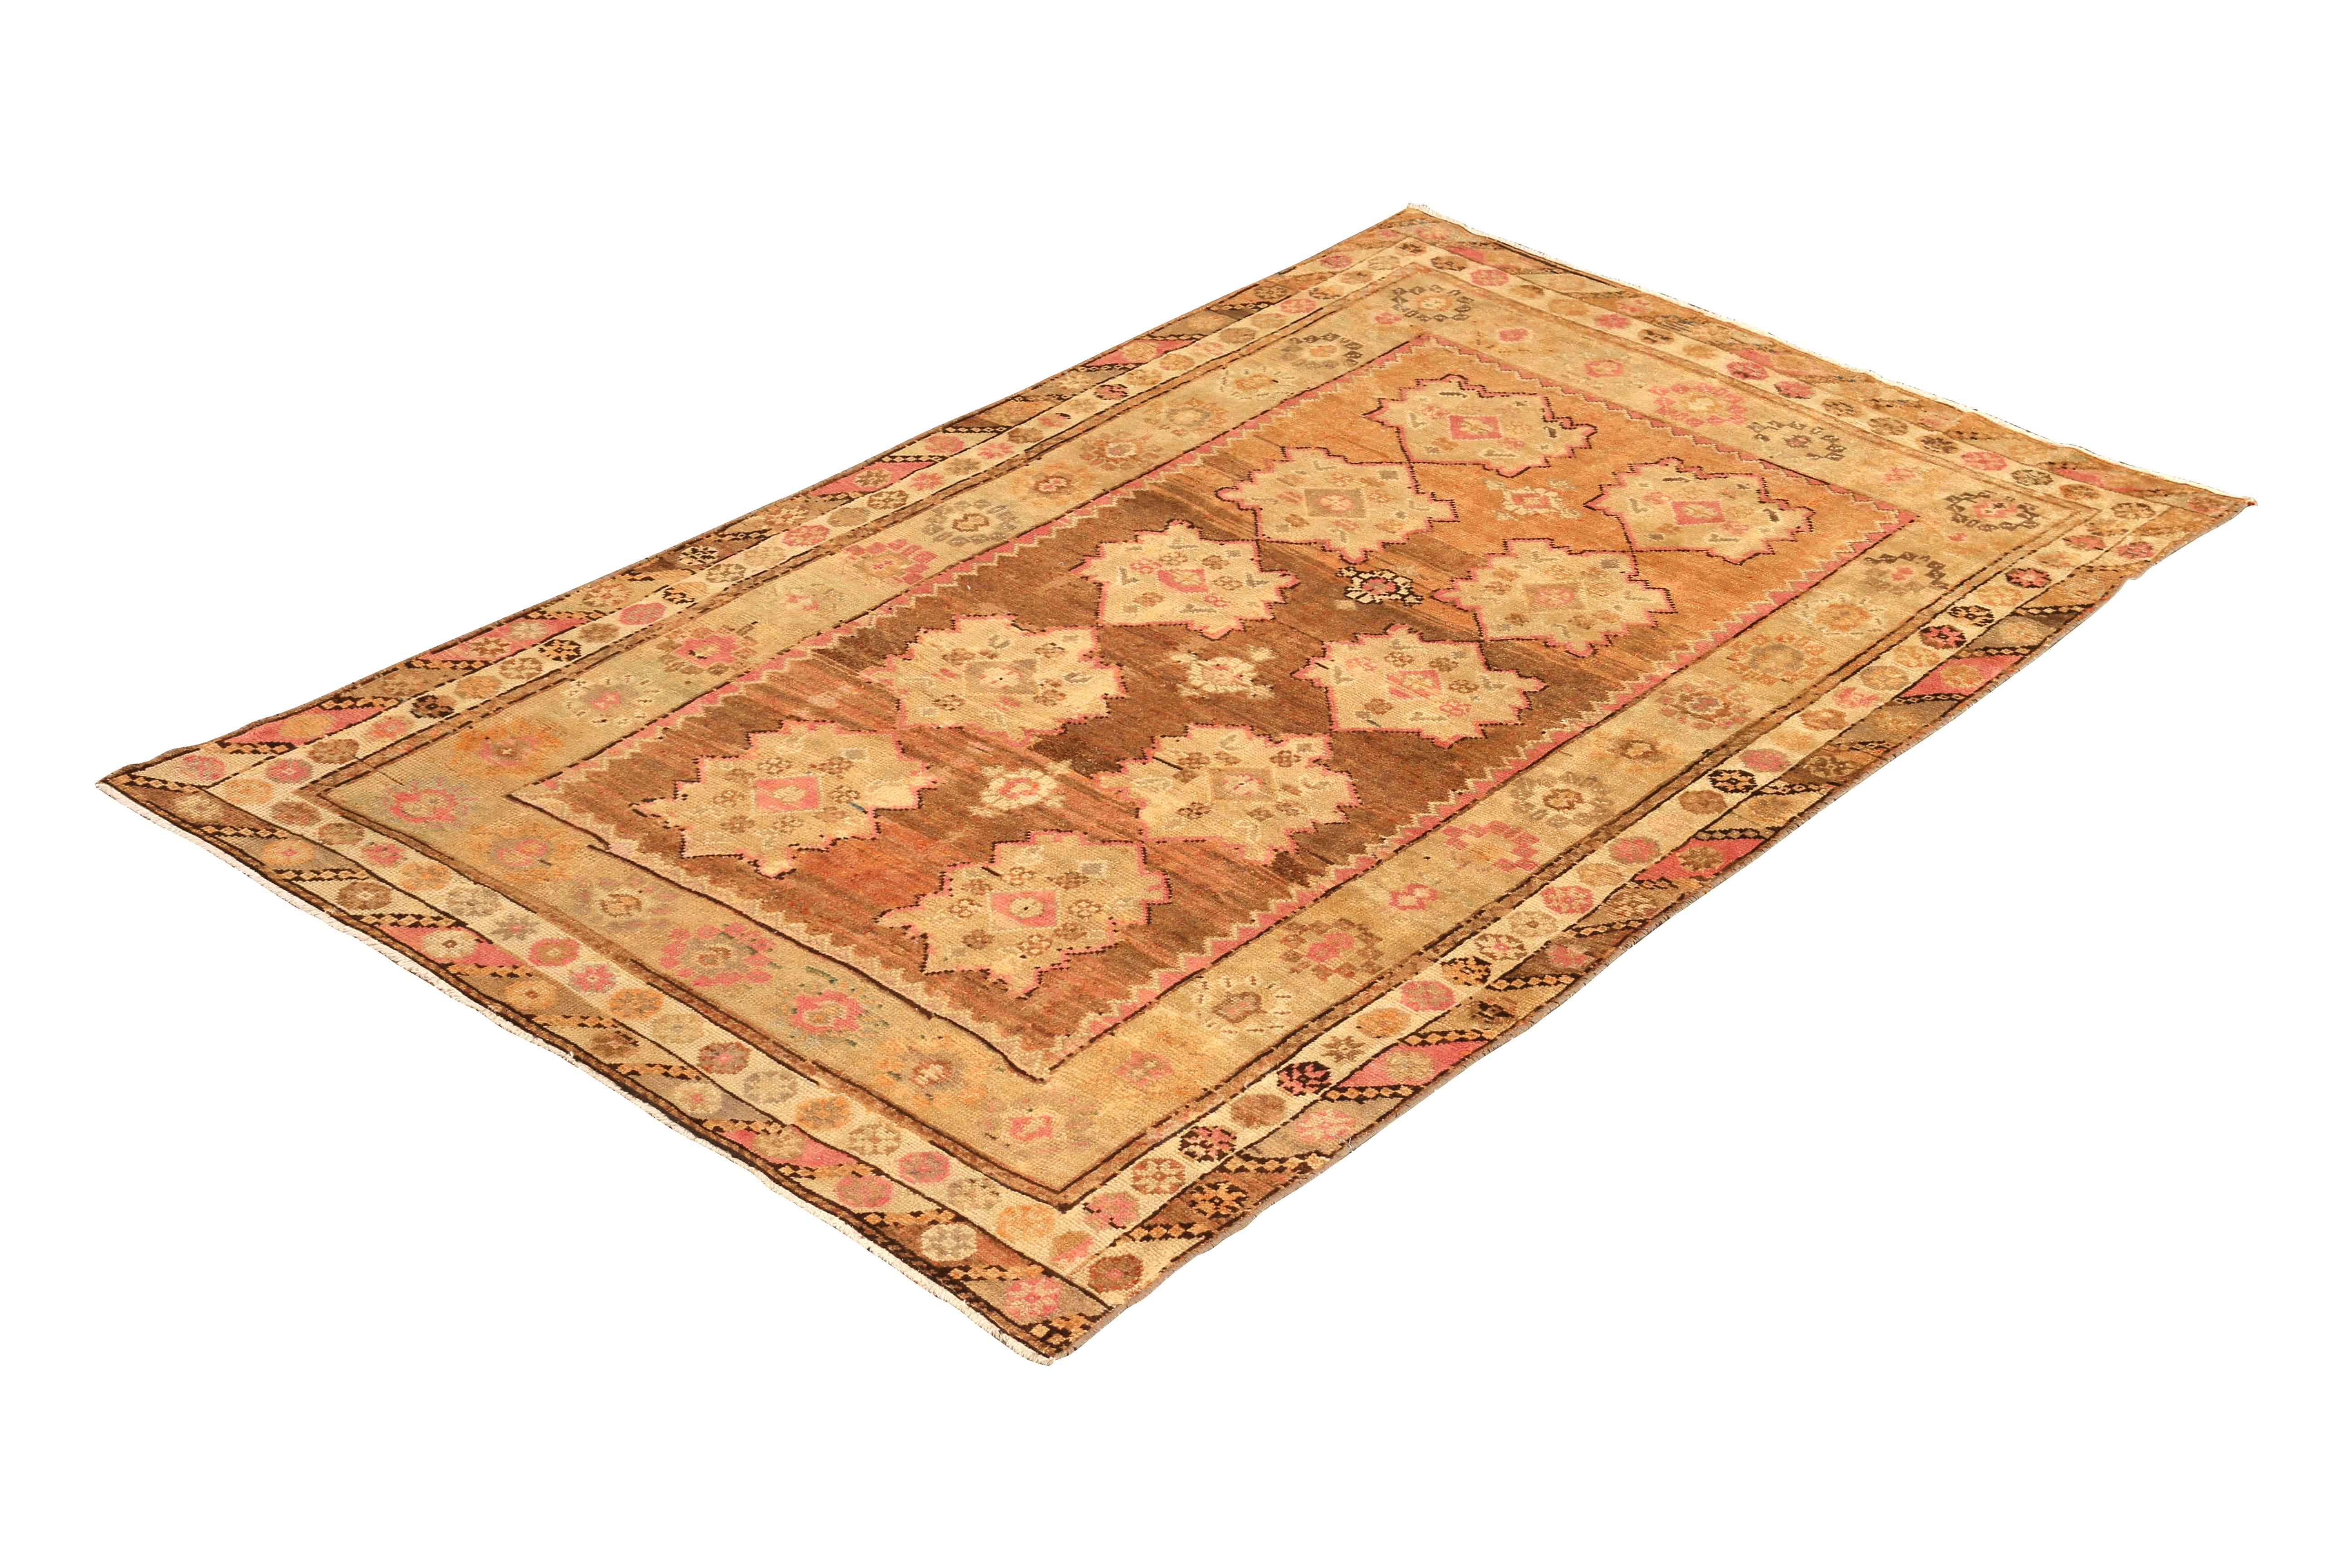 Hand knotted in wool from a notable sheen yarn originating from Turkey circa 1950-1960, this midcentury rug remarks a distinctive vintage Oushak rug design with a notably inviting peach accent, abashed in the prevailing beige-brown hues. The